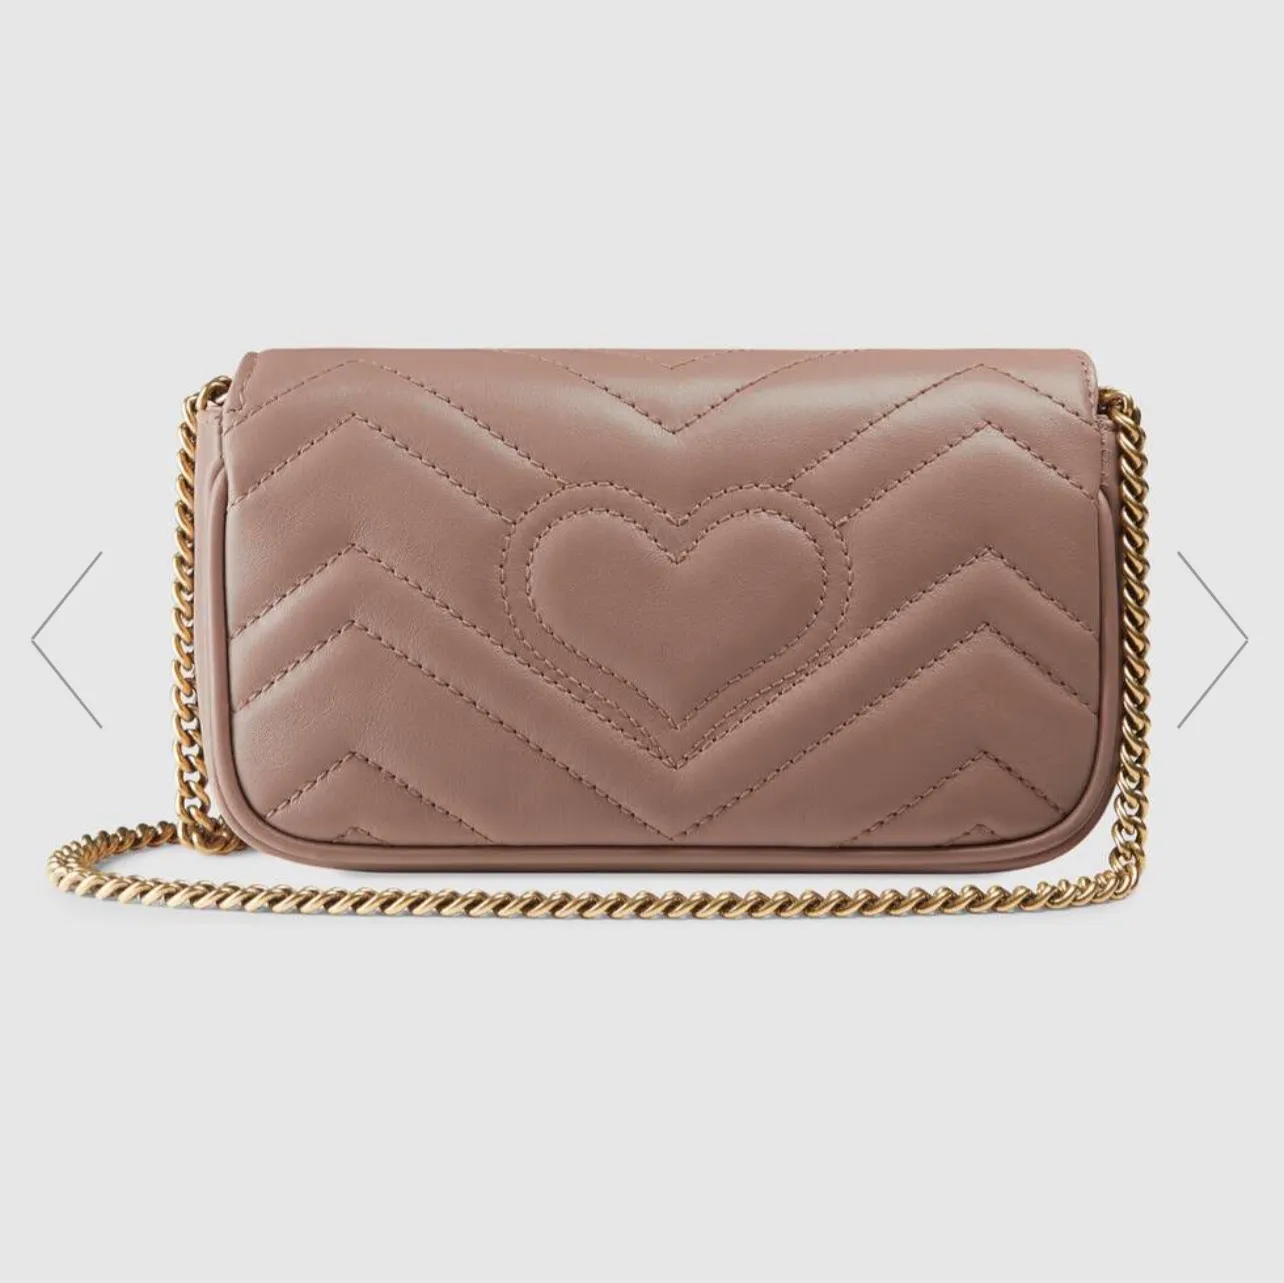 Marmont Chevron Leather Super Mini Bag Key Ring Inside Attachable to Big Tote Softly Structured Shape Flap Closure with Double Let2120